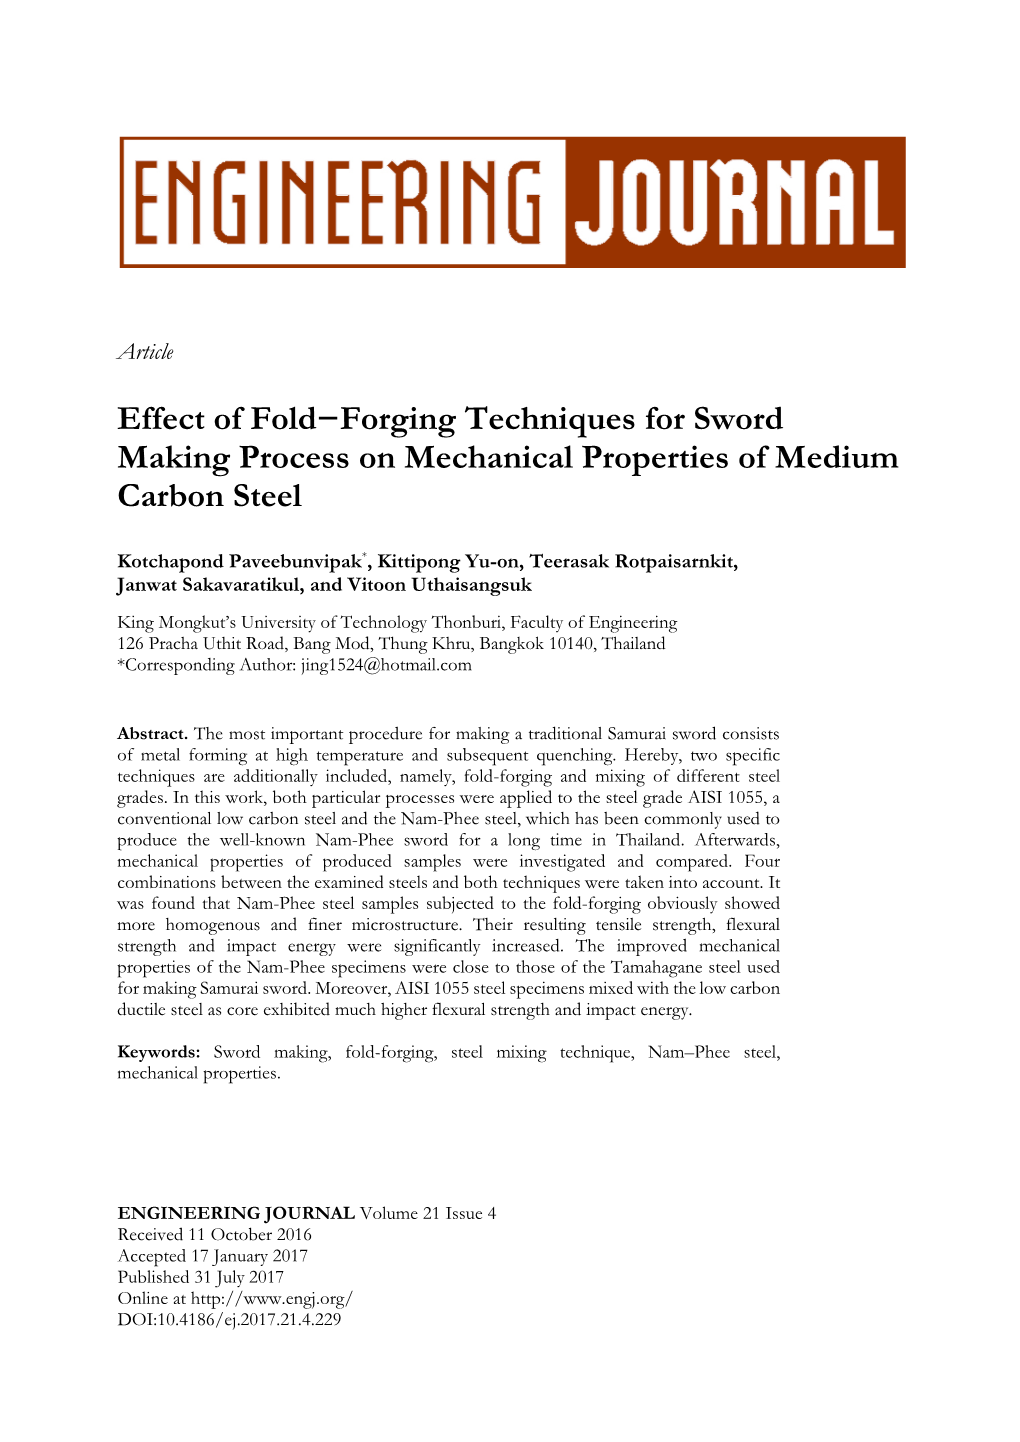 Effect of Fold−Forging Techniques for Sword Making Process on Mechanical Properties of Medium Carbon Steel